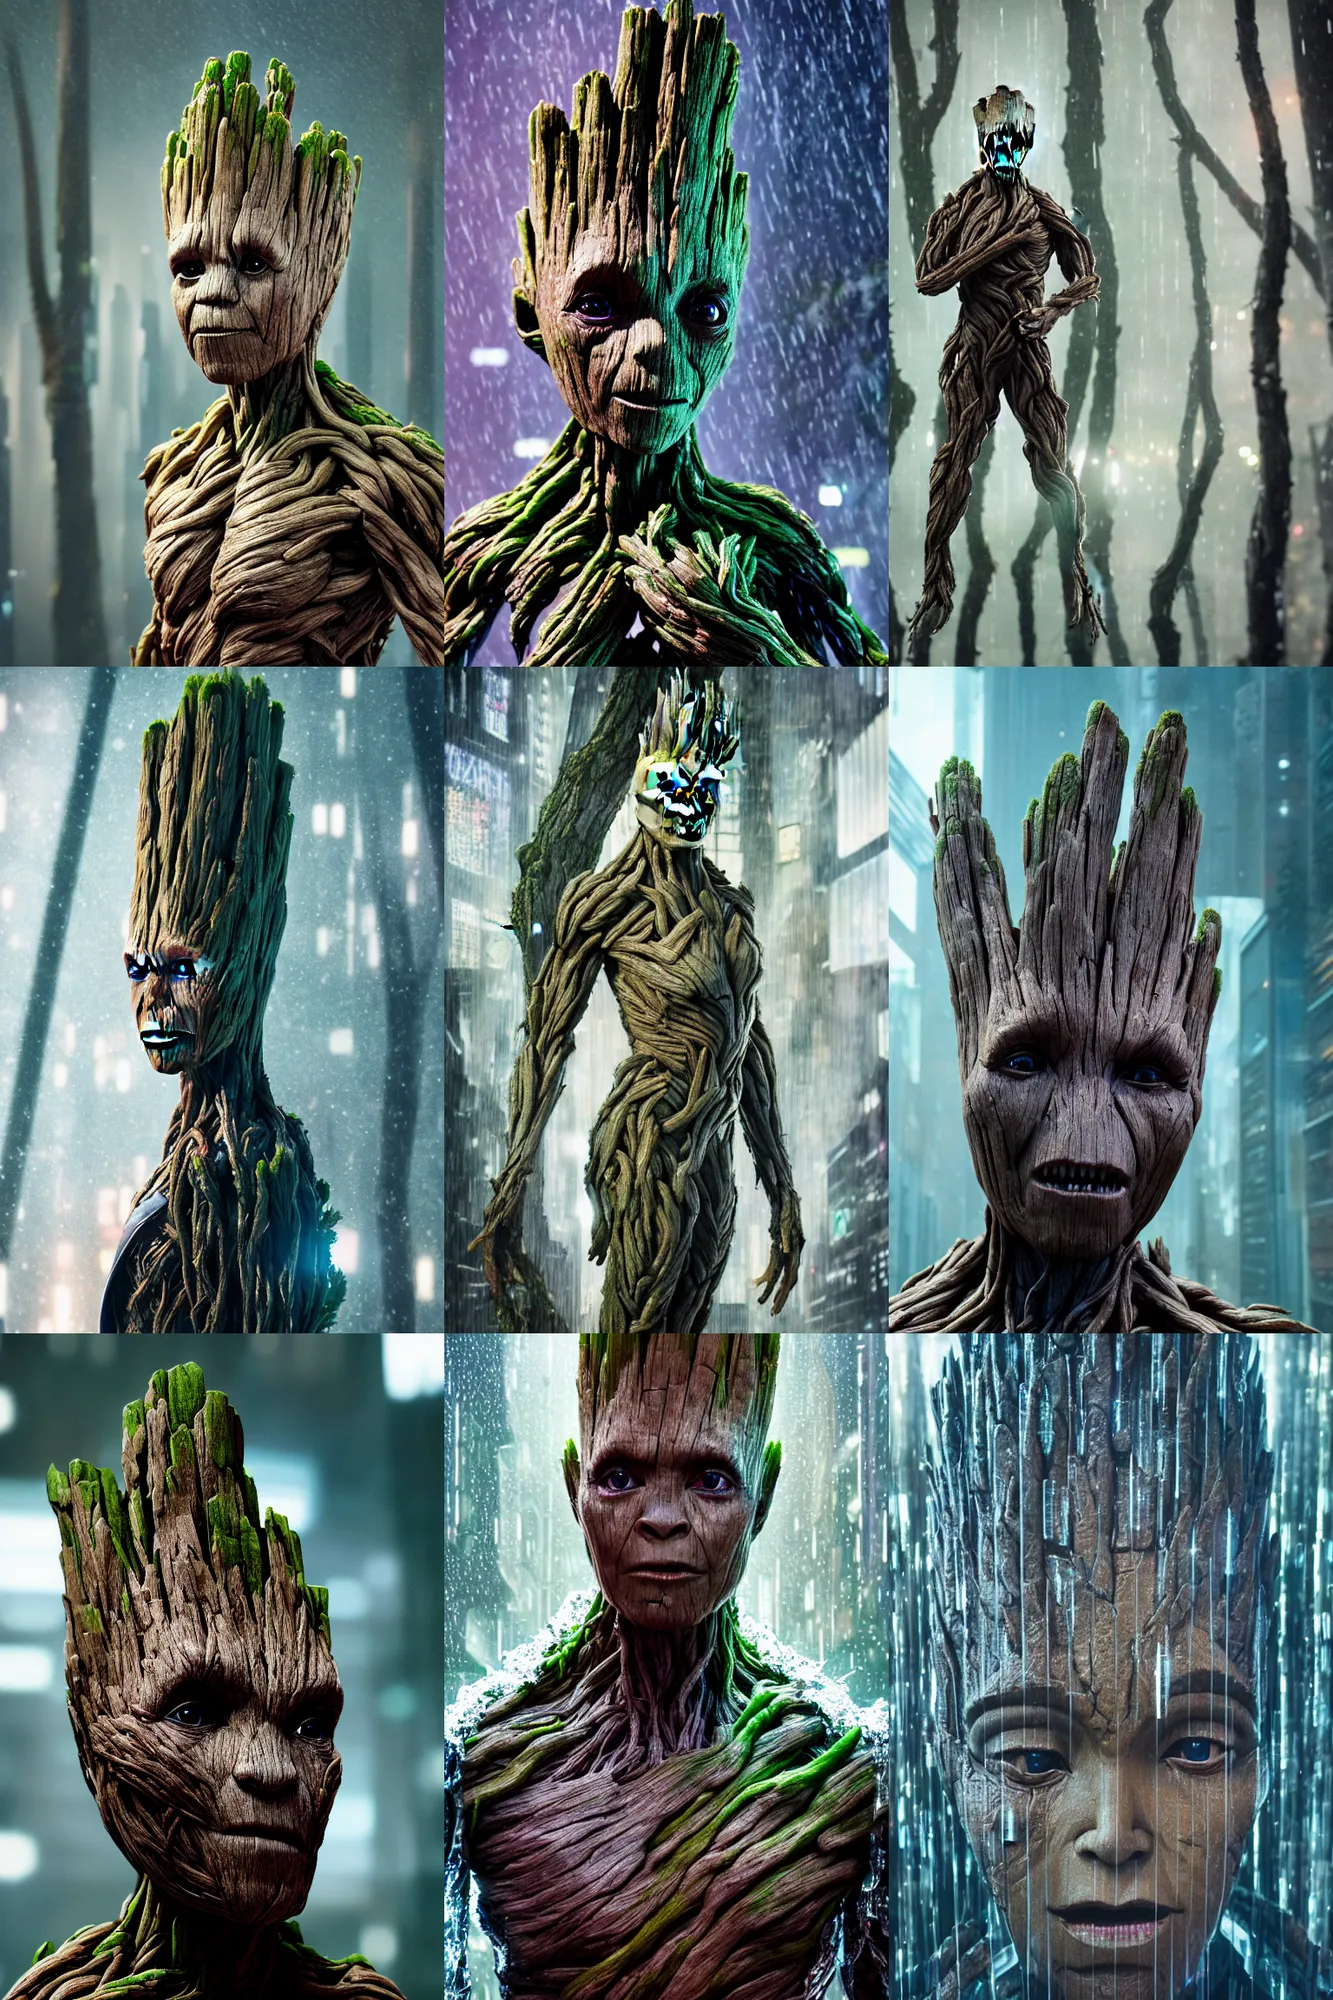 Prompt: Cinestill 50d, 8K, highly detailed, guardians of the galaxy groot style 3/4 extreme closeup portrait, eye contact, focus on clear transparent raincoat model, tilt shift zaha hadid style forest background: famous blade runner remake, tokyo izakaya scene